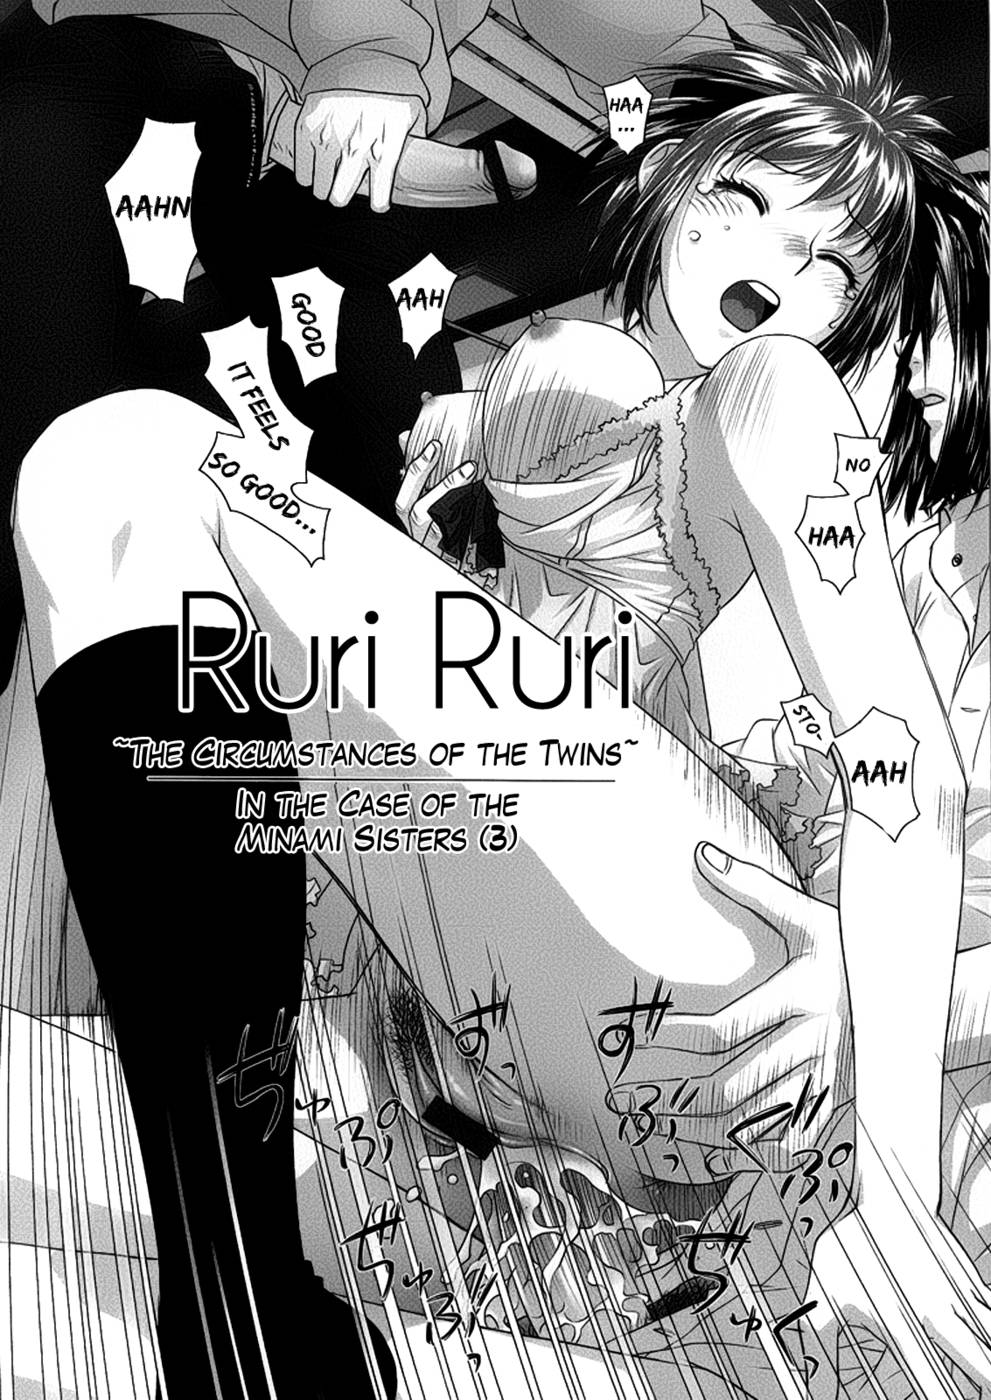 Hentai Manga Comic-Ruri Ruri-Chapter 9-The Circumstances Of The Twins- In The Case Of The Minami Sisters 3-2